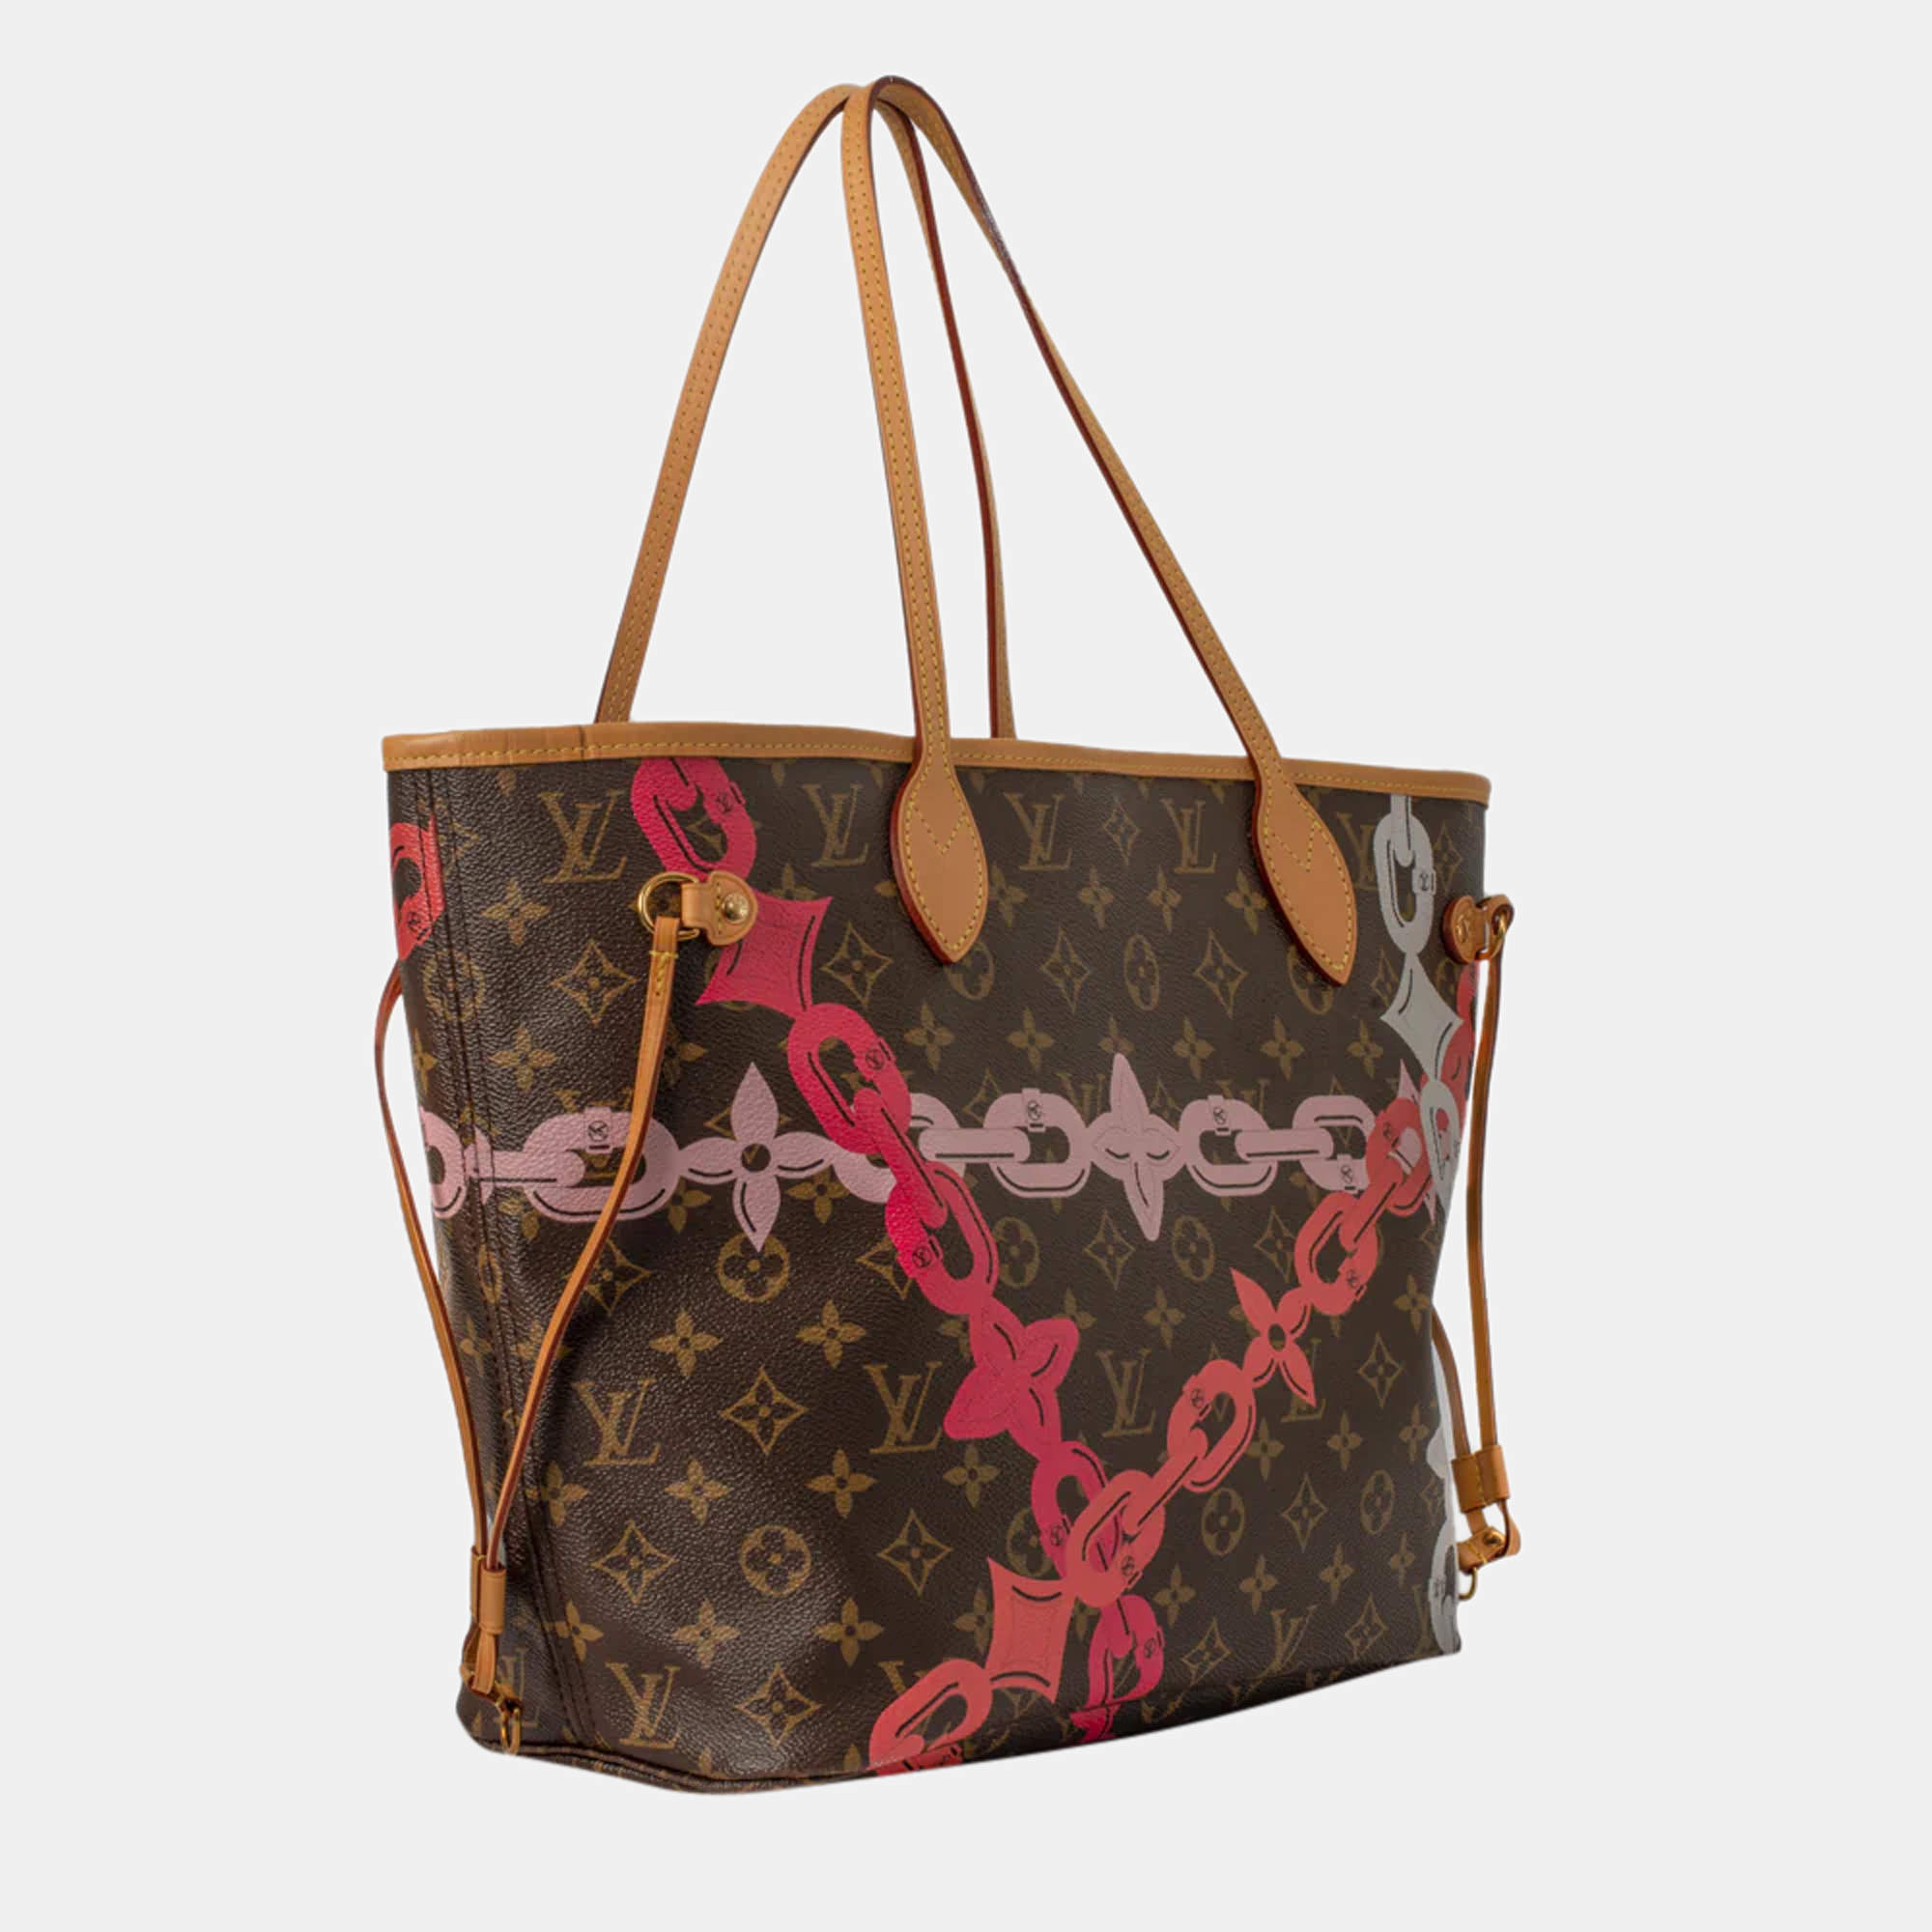 Louis+Vuitton+Neverfull+Tote+MM+Silver+Canvas for sale online